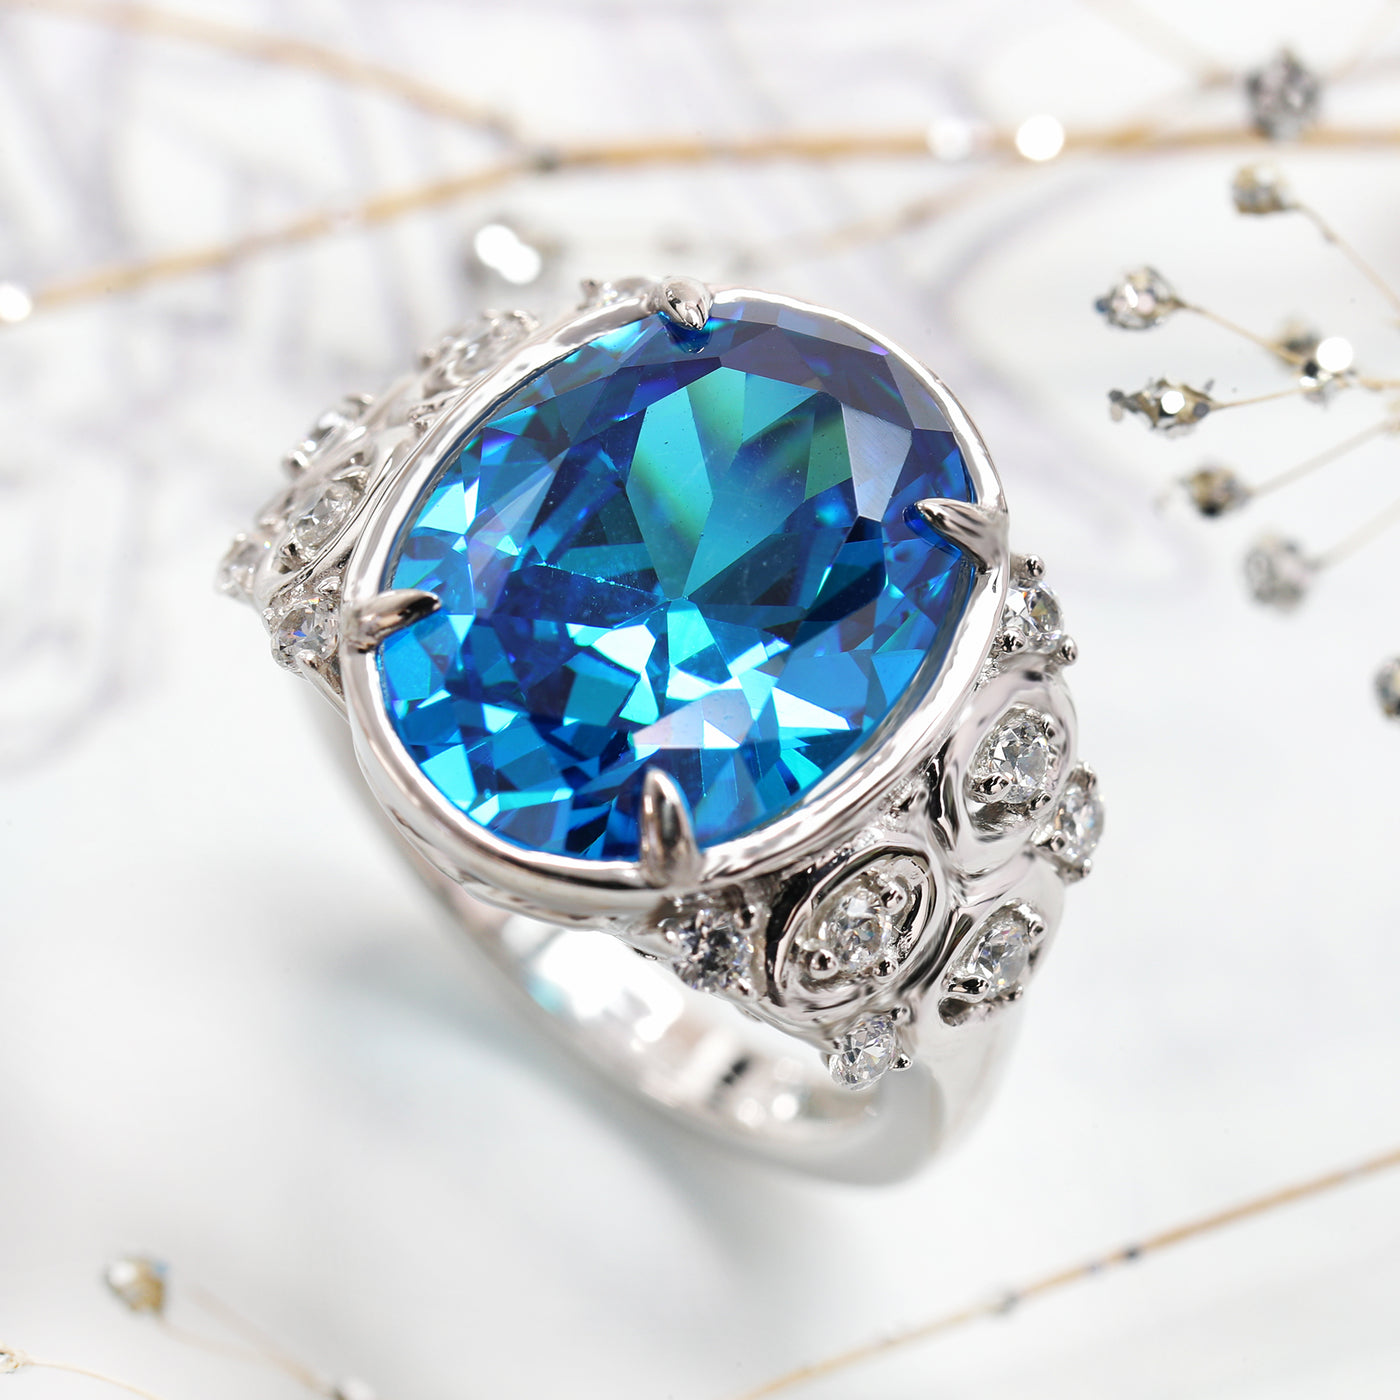 Sterling Silver Simulated London Blue Topaz Vintage Edwardian Cocktail Ring